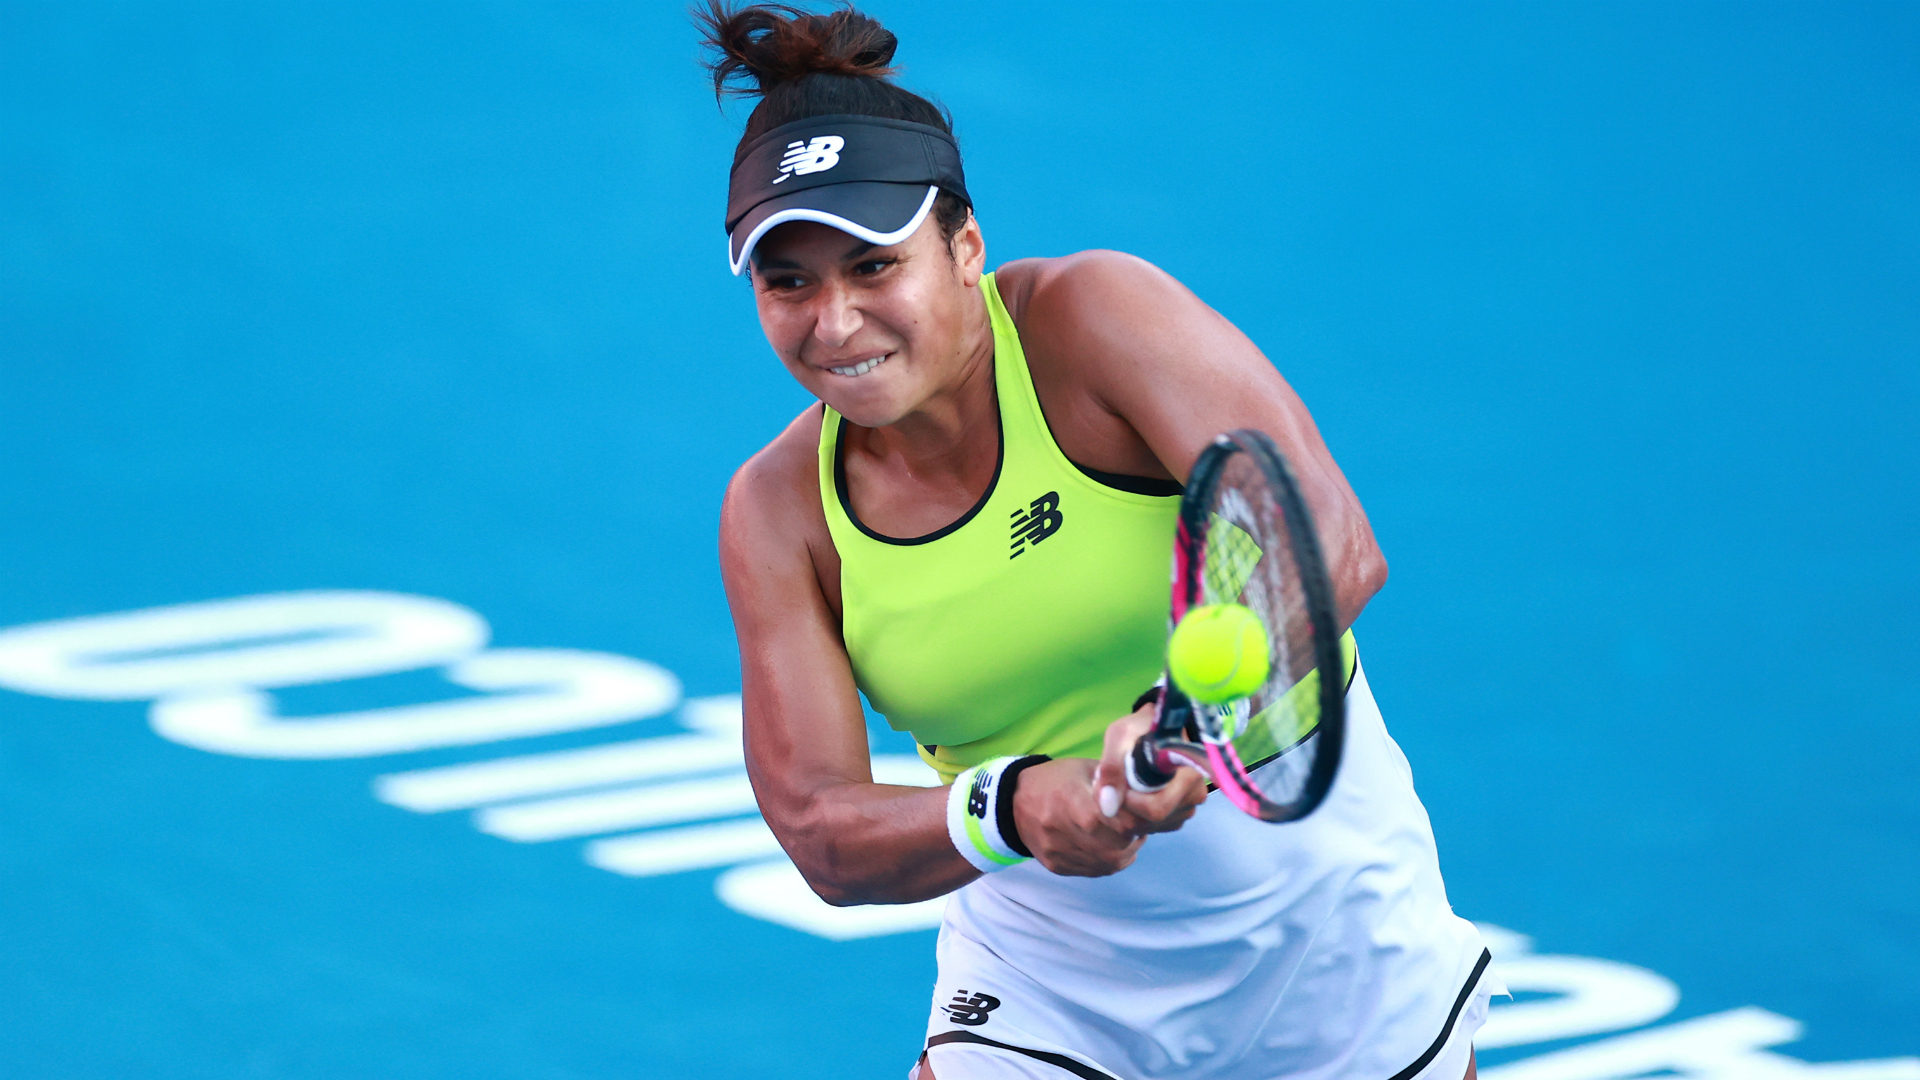 Heather Watson – the British seventh seed – overcame Wang Xiyu 6-4 7-6 (8-6) at the WTA International tournament in Acapulco on Friday.